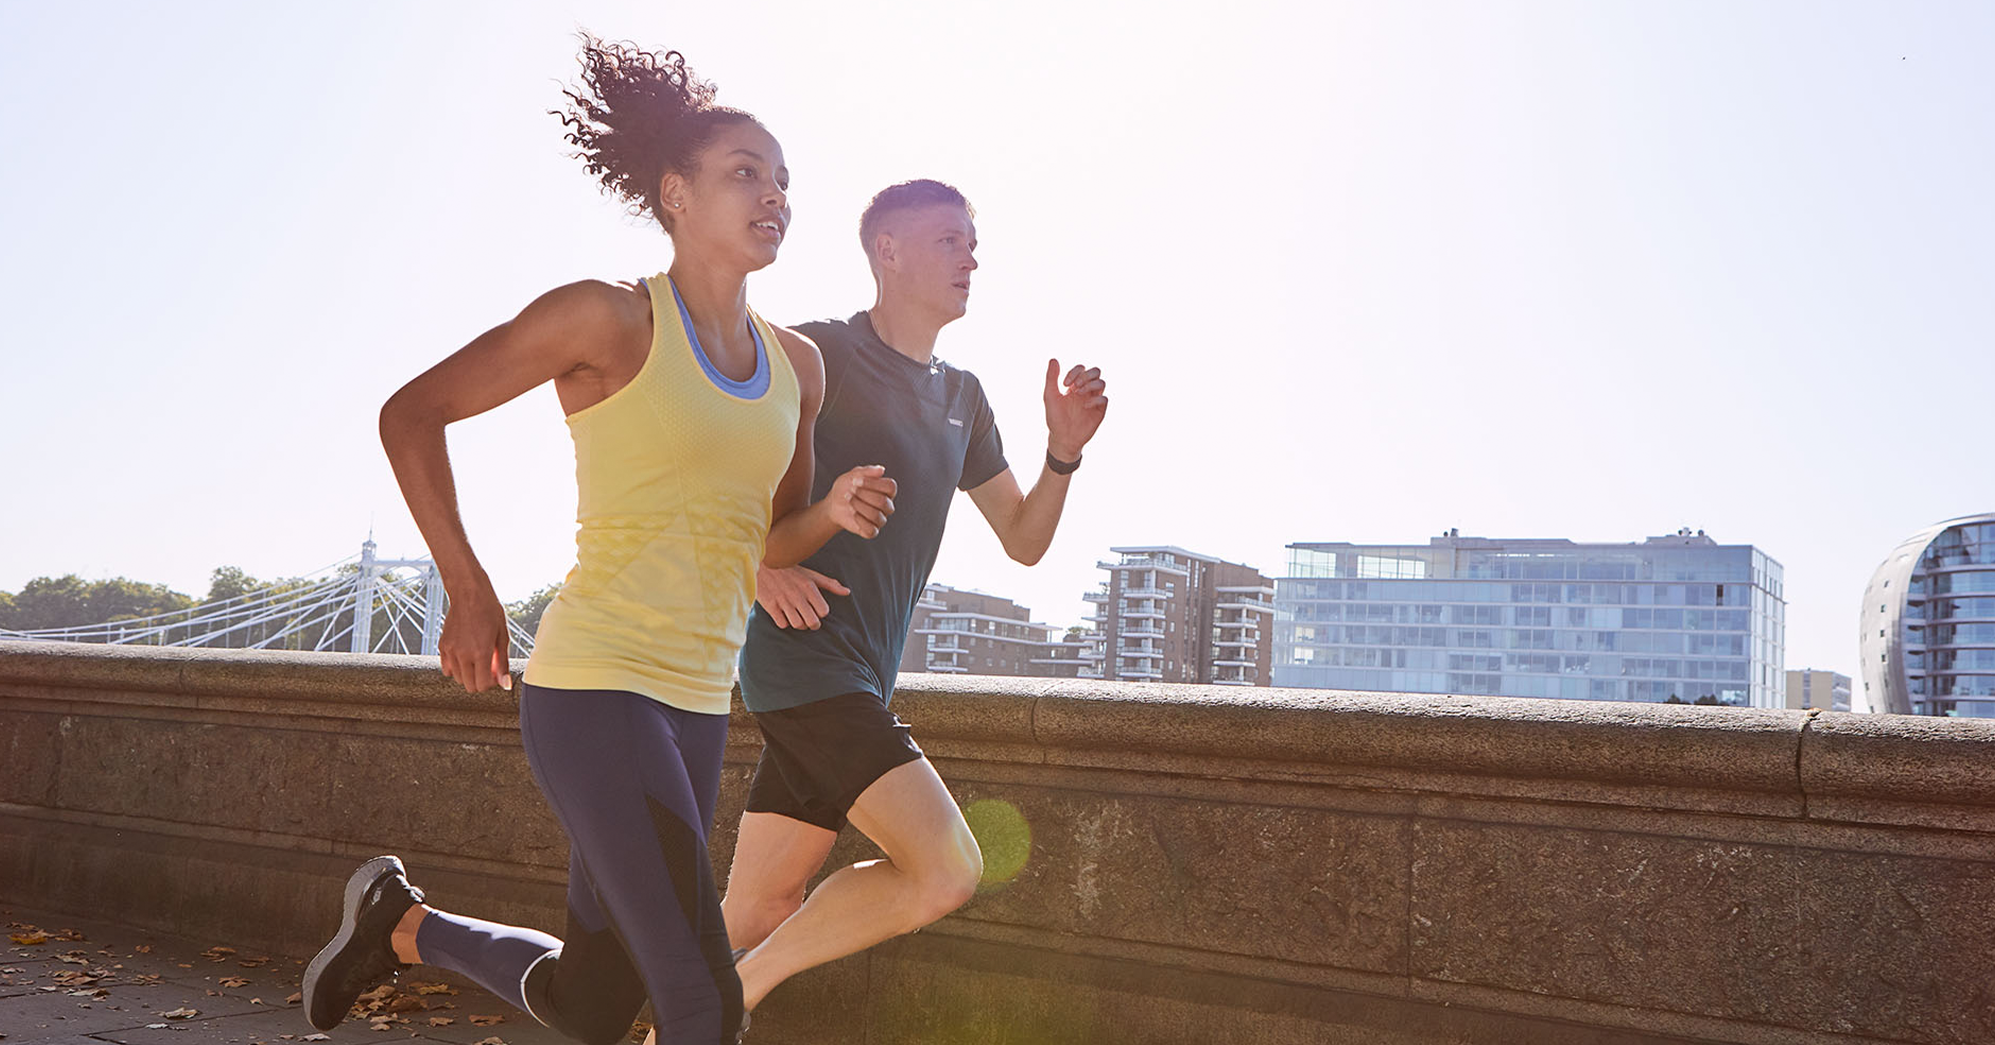 Tips for running safely in hot weather